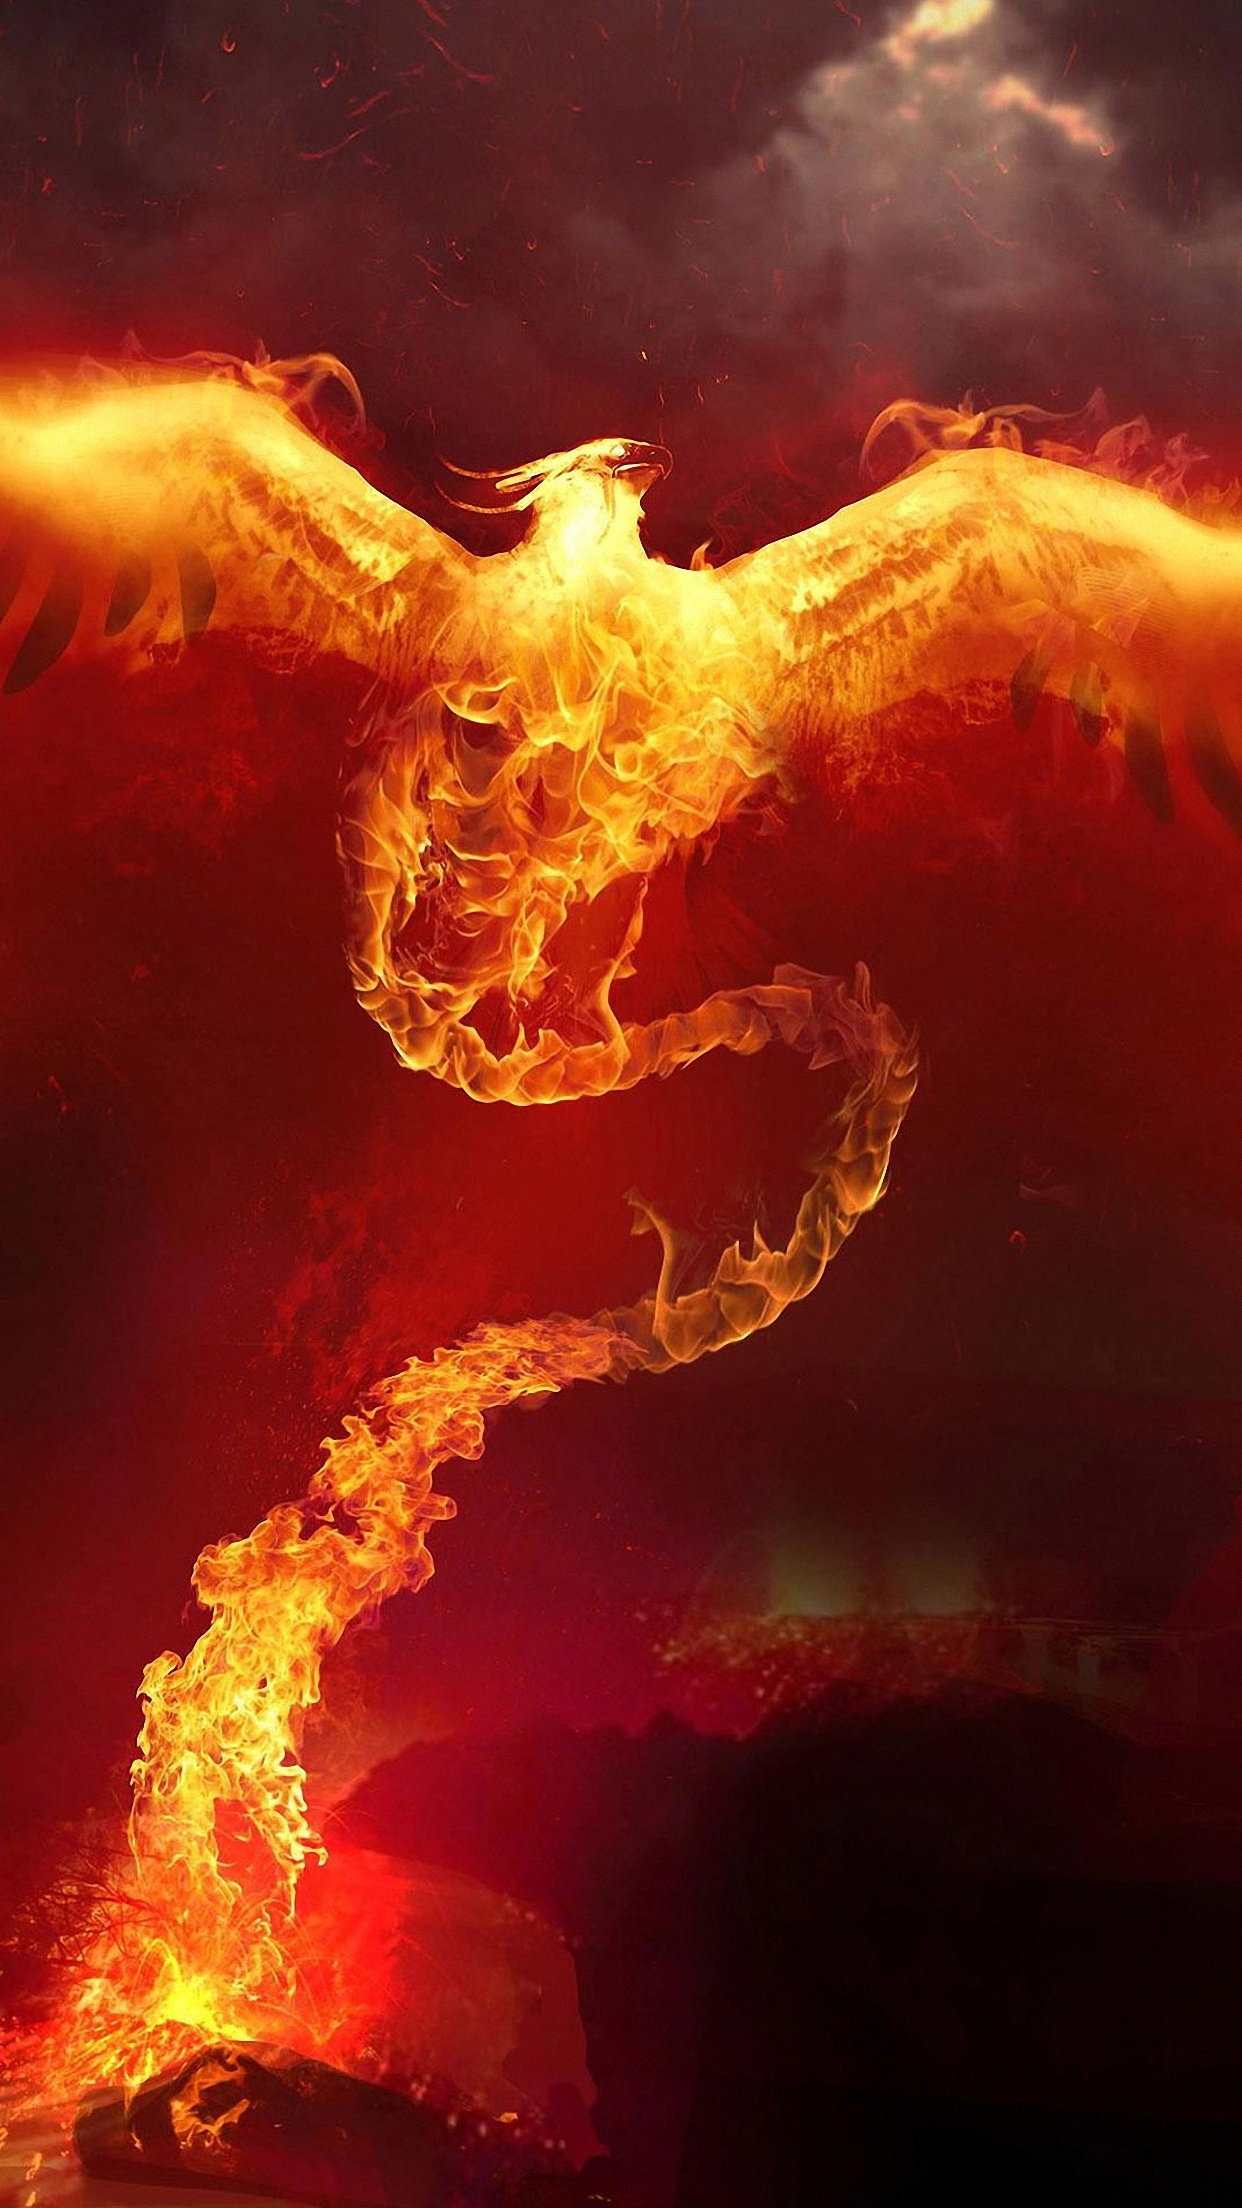 Fire phone wallpapers, fire images, Stunning flames, Fiery phone backgrounds, Intense fire moments, 1250x2210 HD Handy